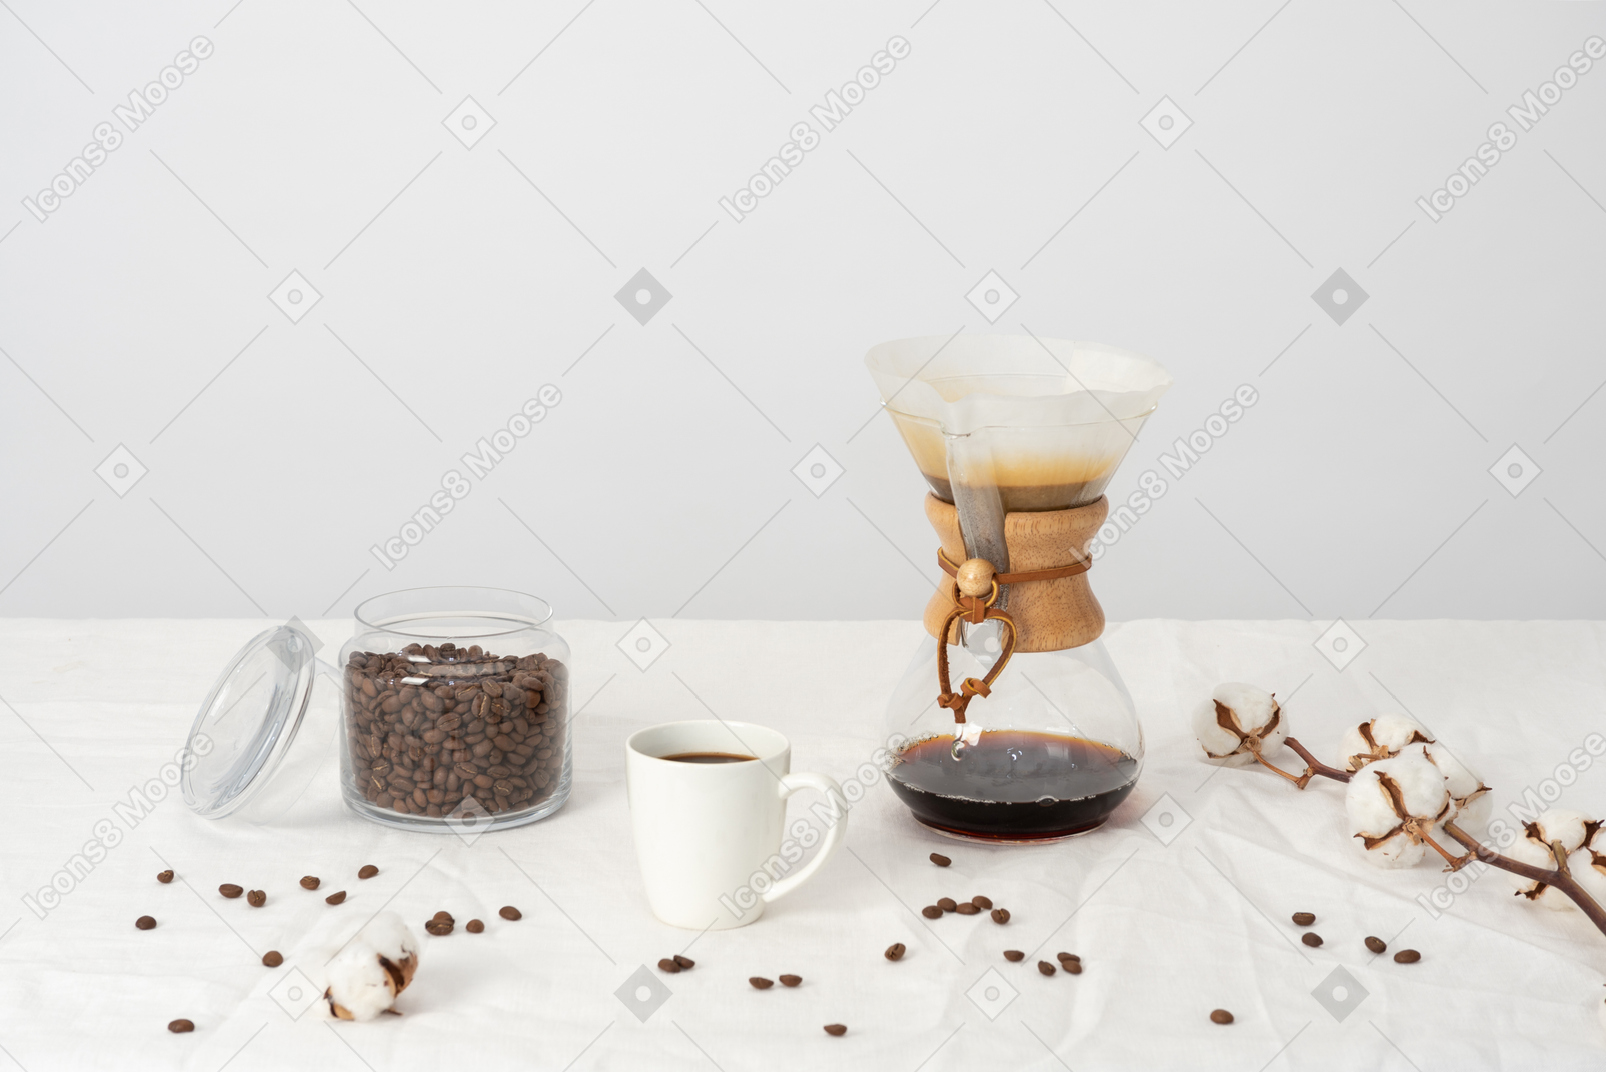 Chemex, large cup of coffee, jat of coffee beans, cotton branch and scattered coffee beans